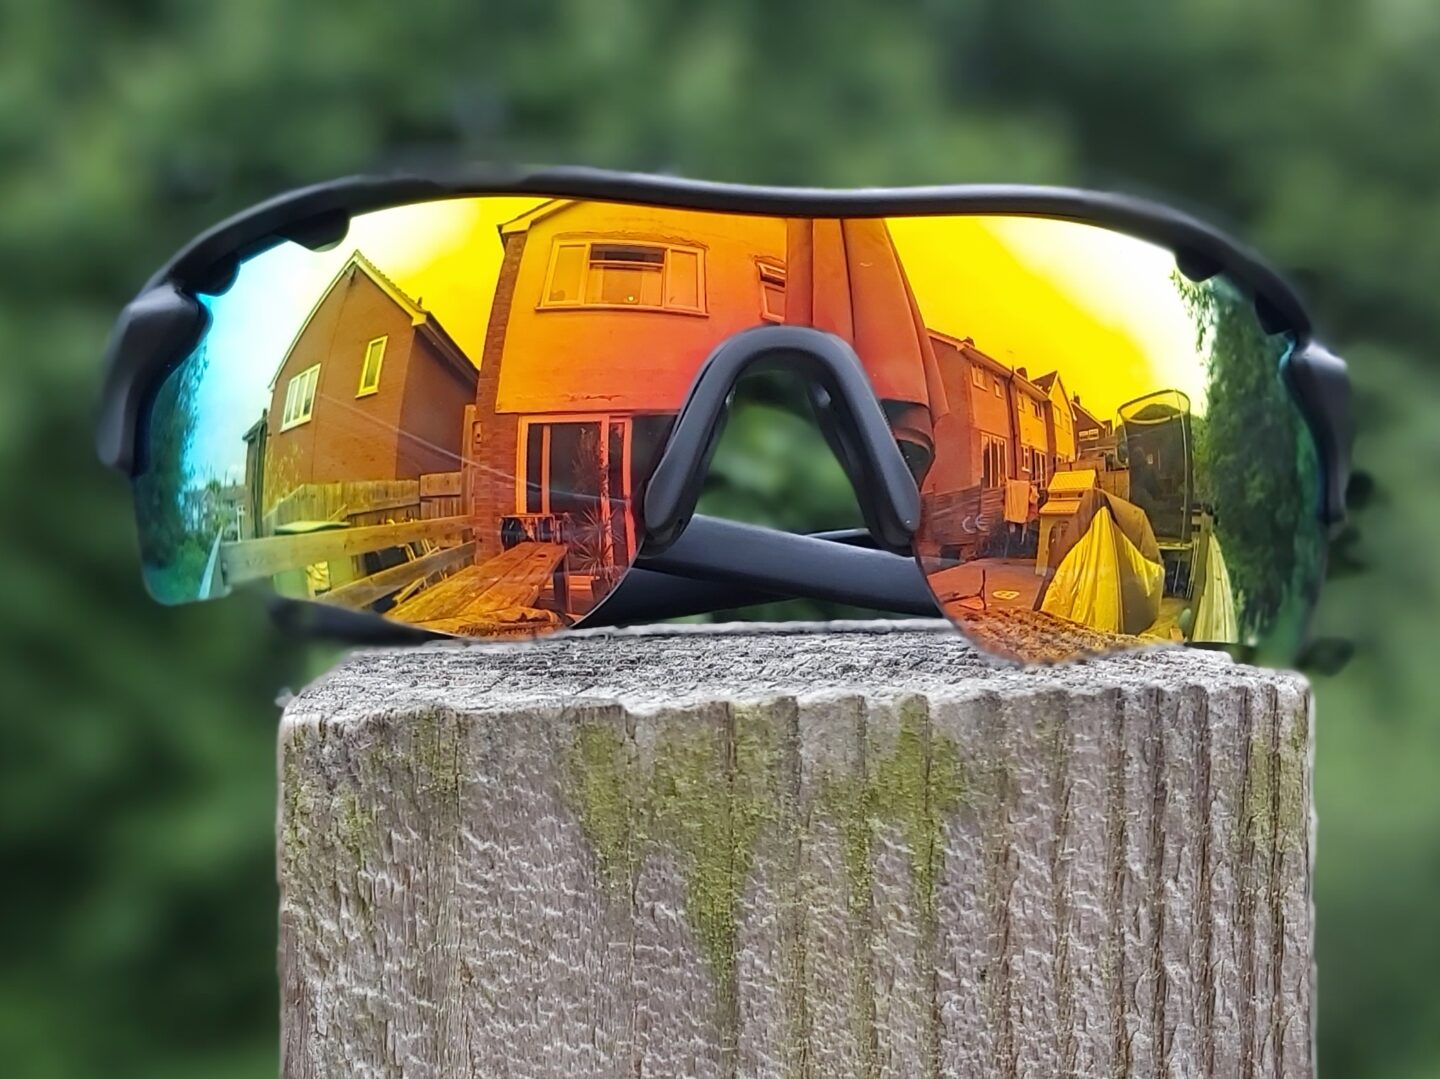 sunglasses displayed outdoors with a house reflected in the mirrored lens - sports glasses make great gifts for hikers